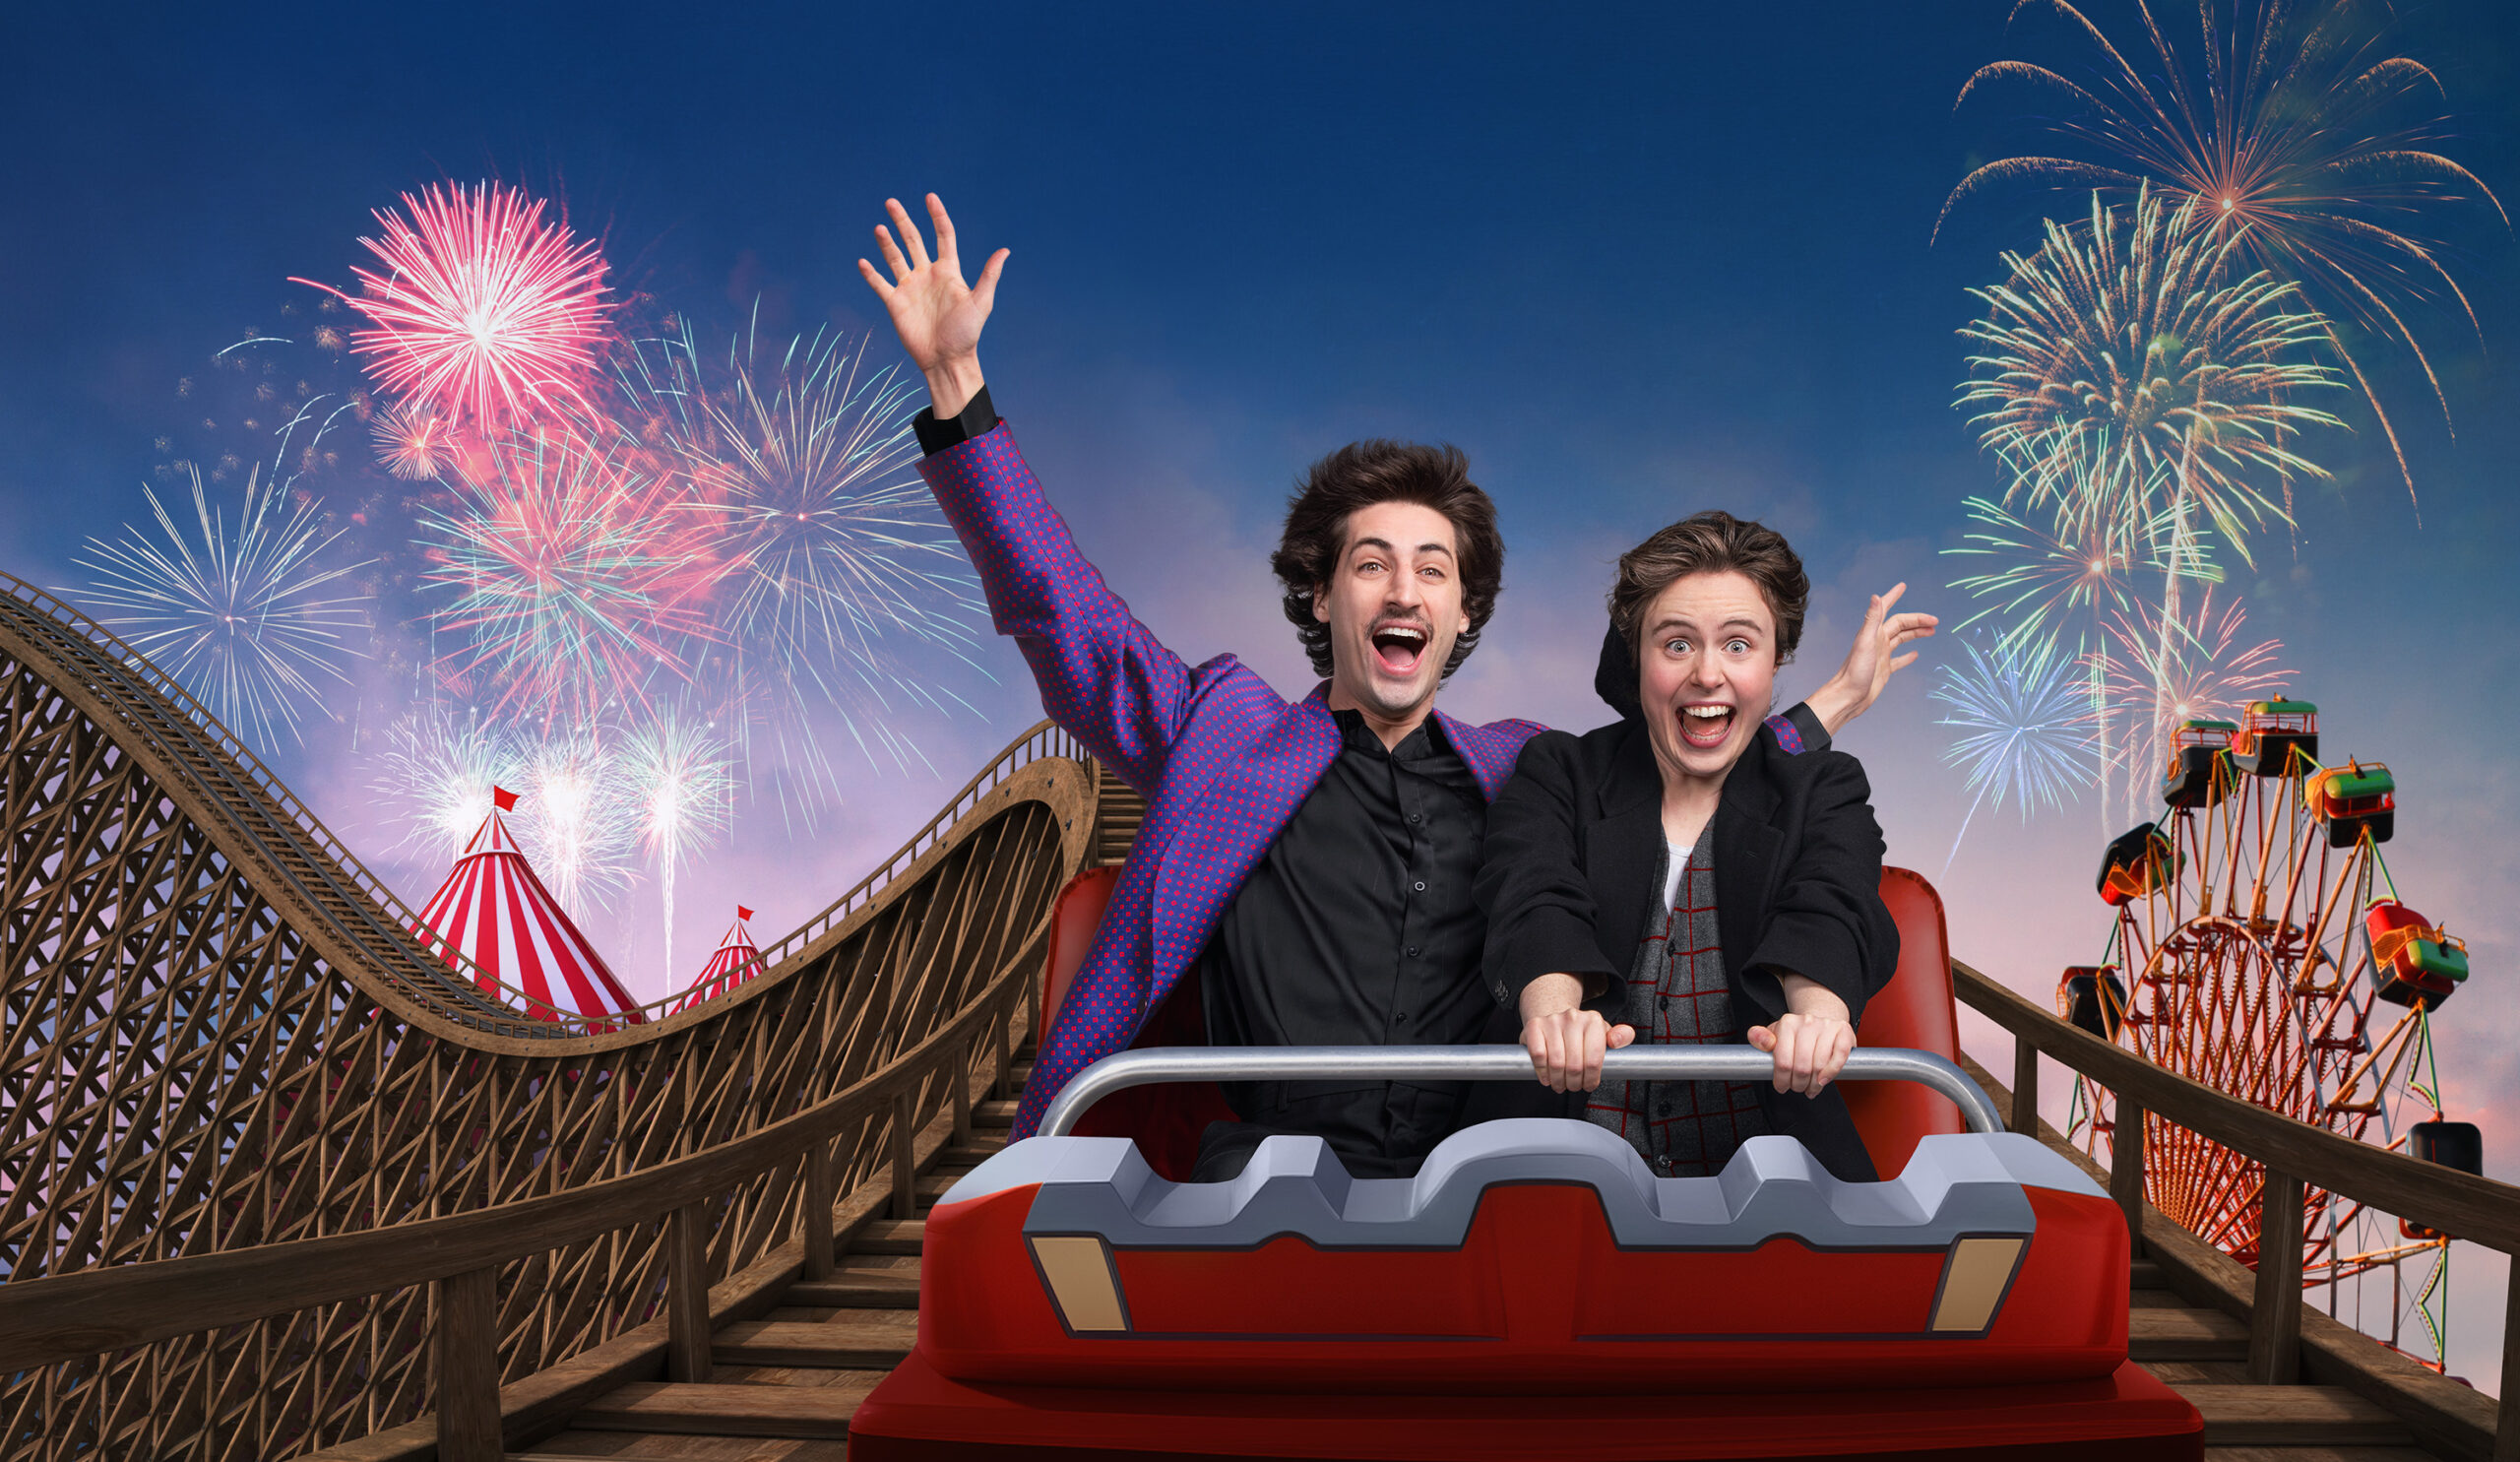 Orsino and Viola in a rollercoaster car with excited faces